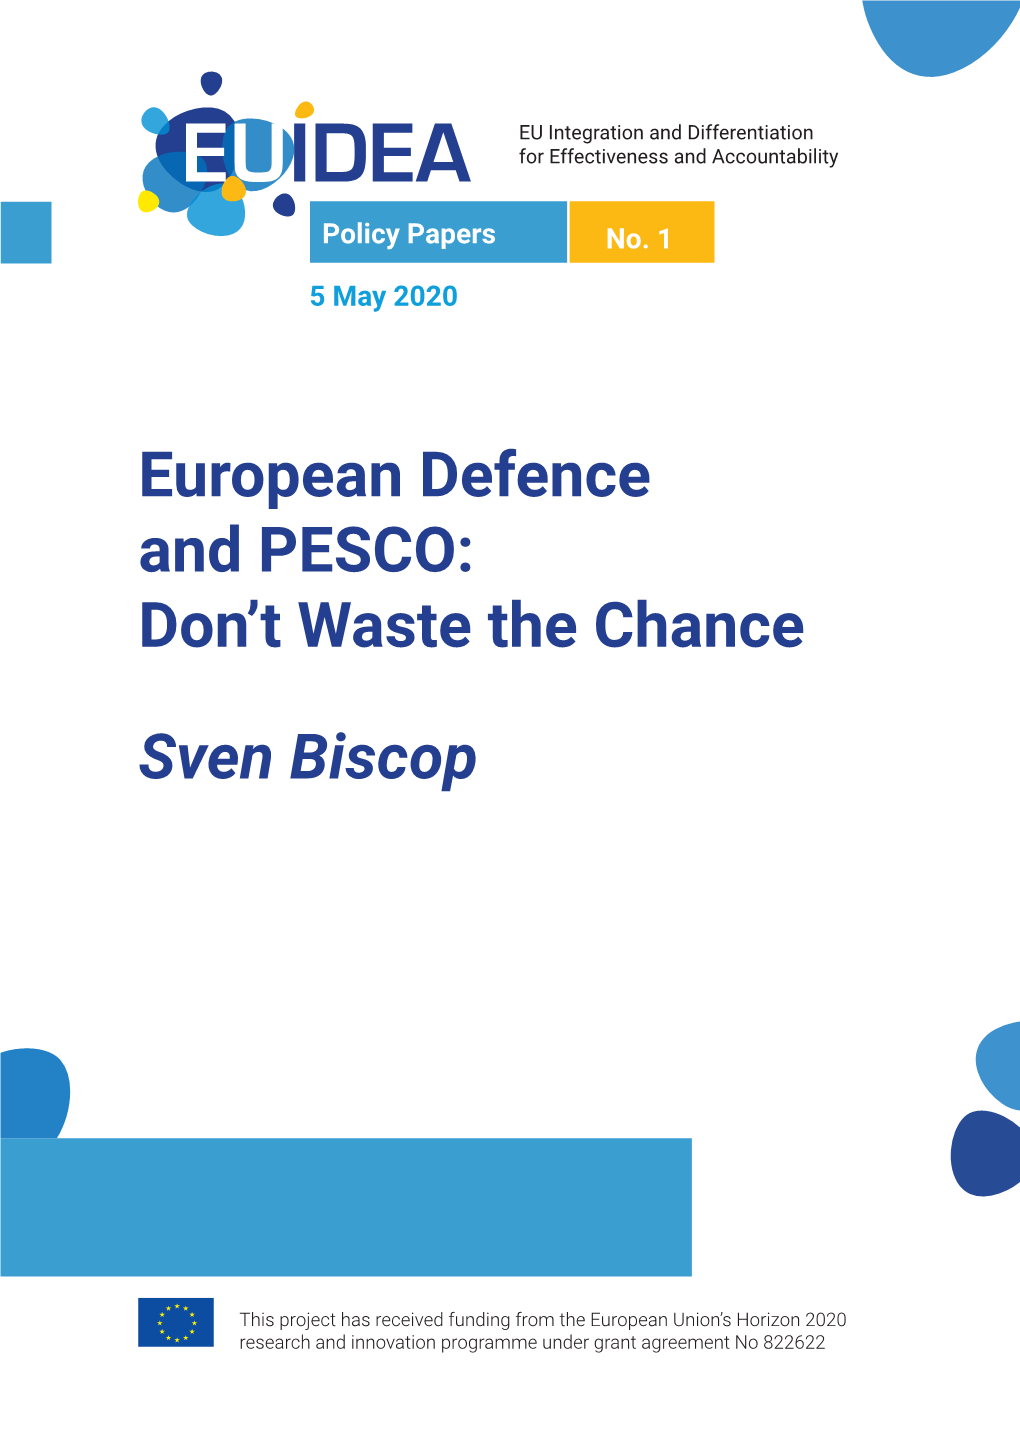 European Defence and PESCO: Don't Waste the Chance